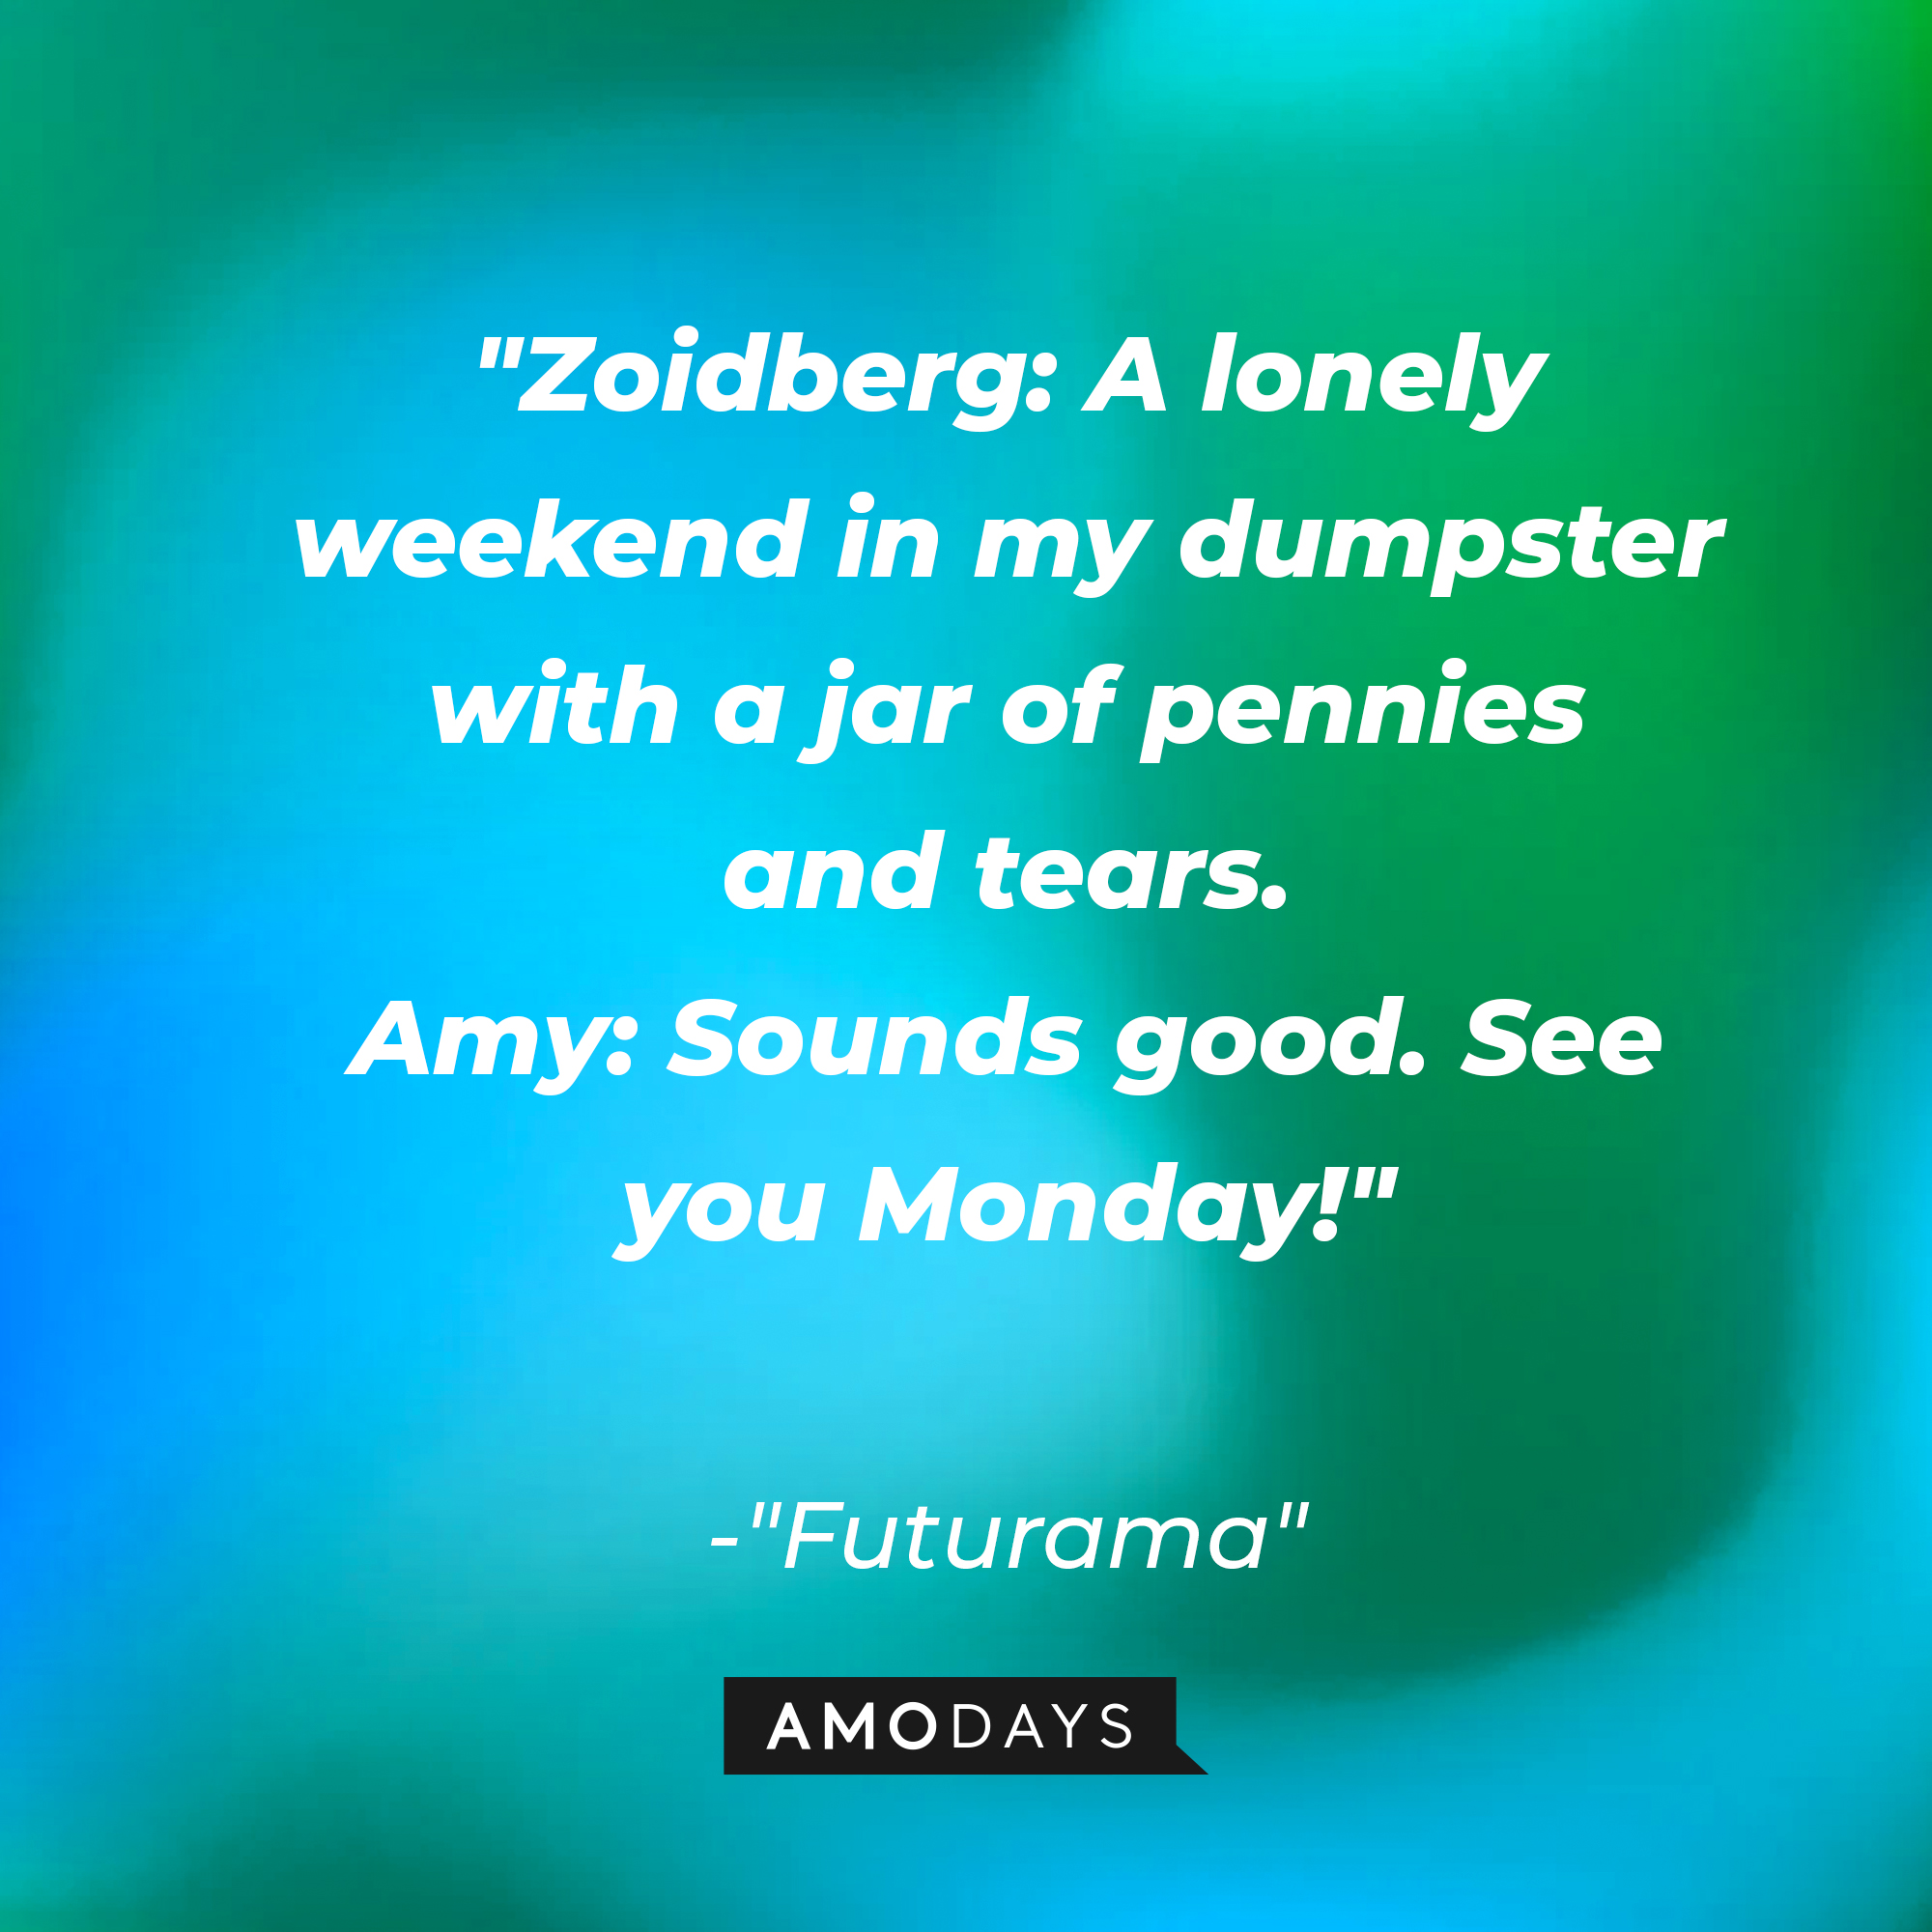 "Futurama" quote: "Zoidberg: A lonely weekend in my dumpster with a jar of pennies and tears. / Amy: Sounds good. See you Monday!" | Source: AmoDays